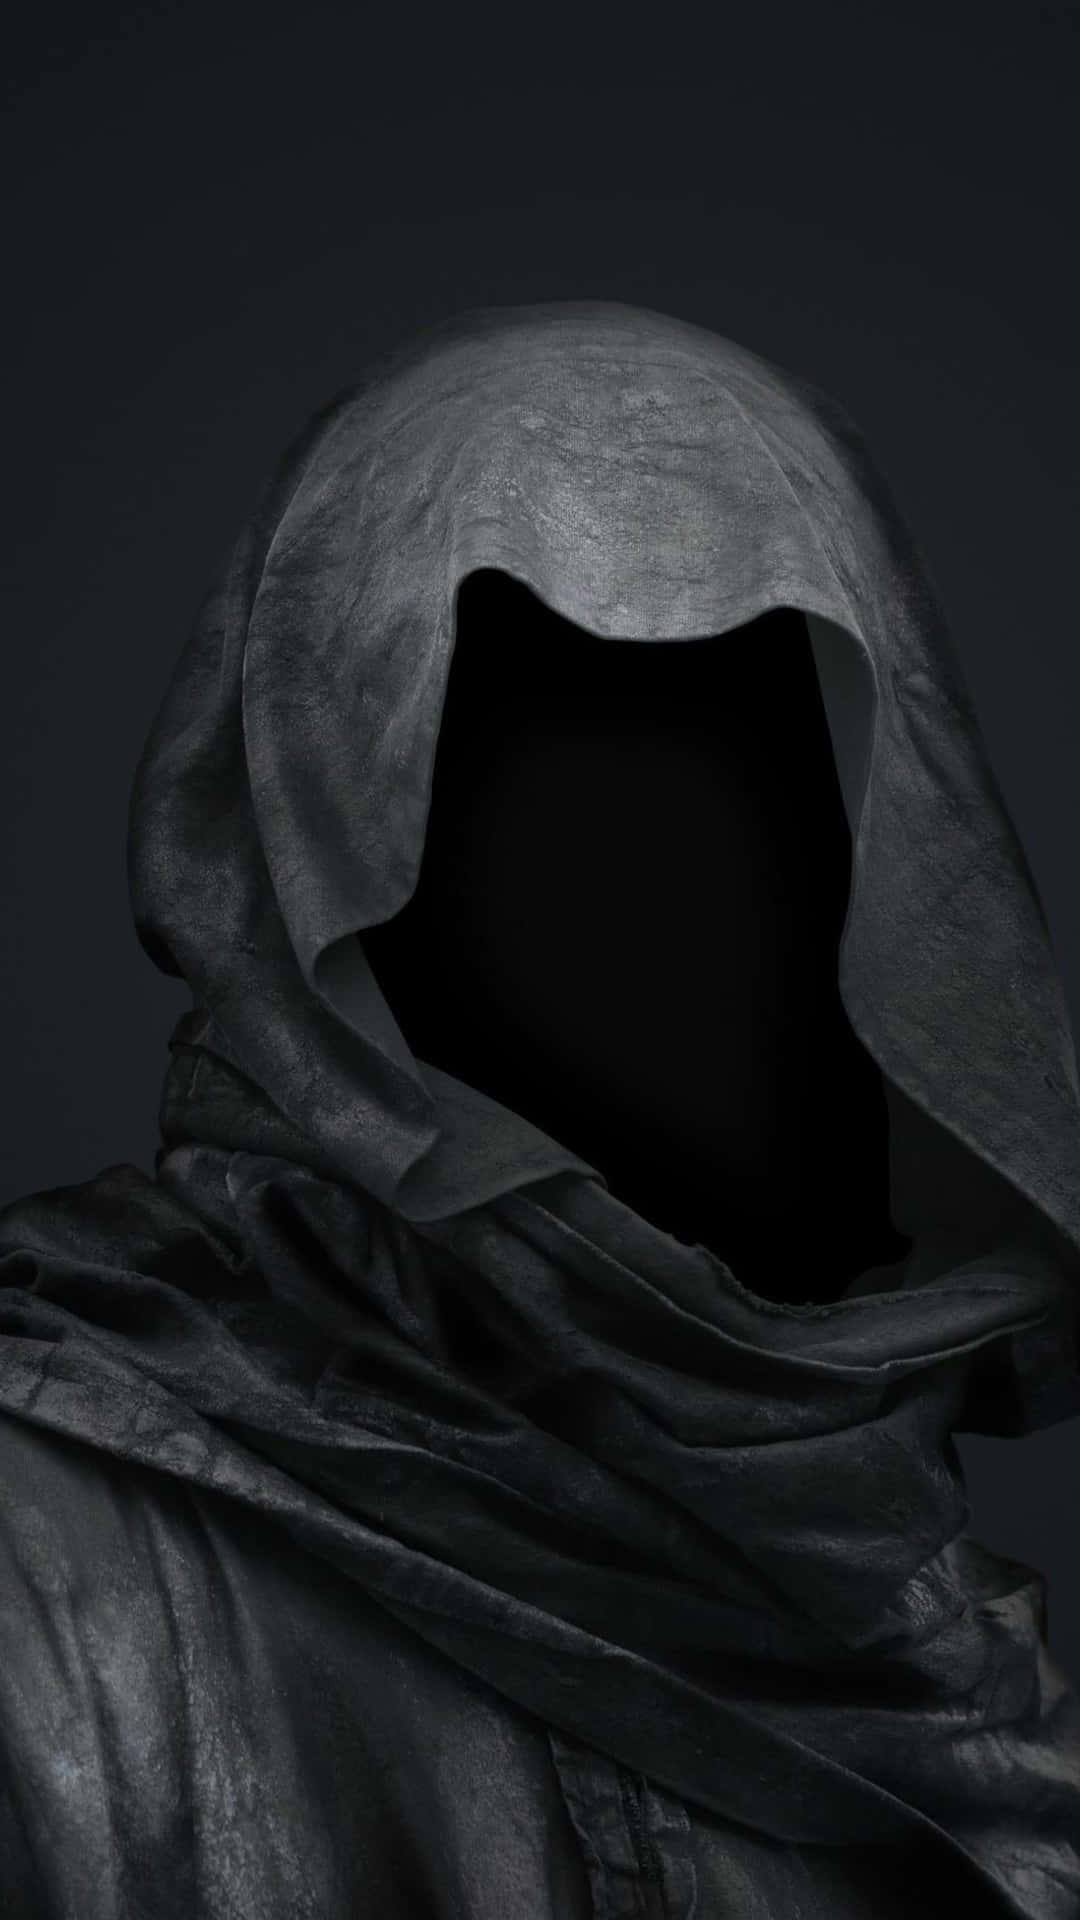 The Grim Reaper awaits, shrouded in darkness